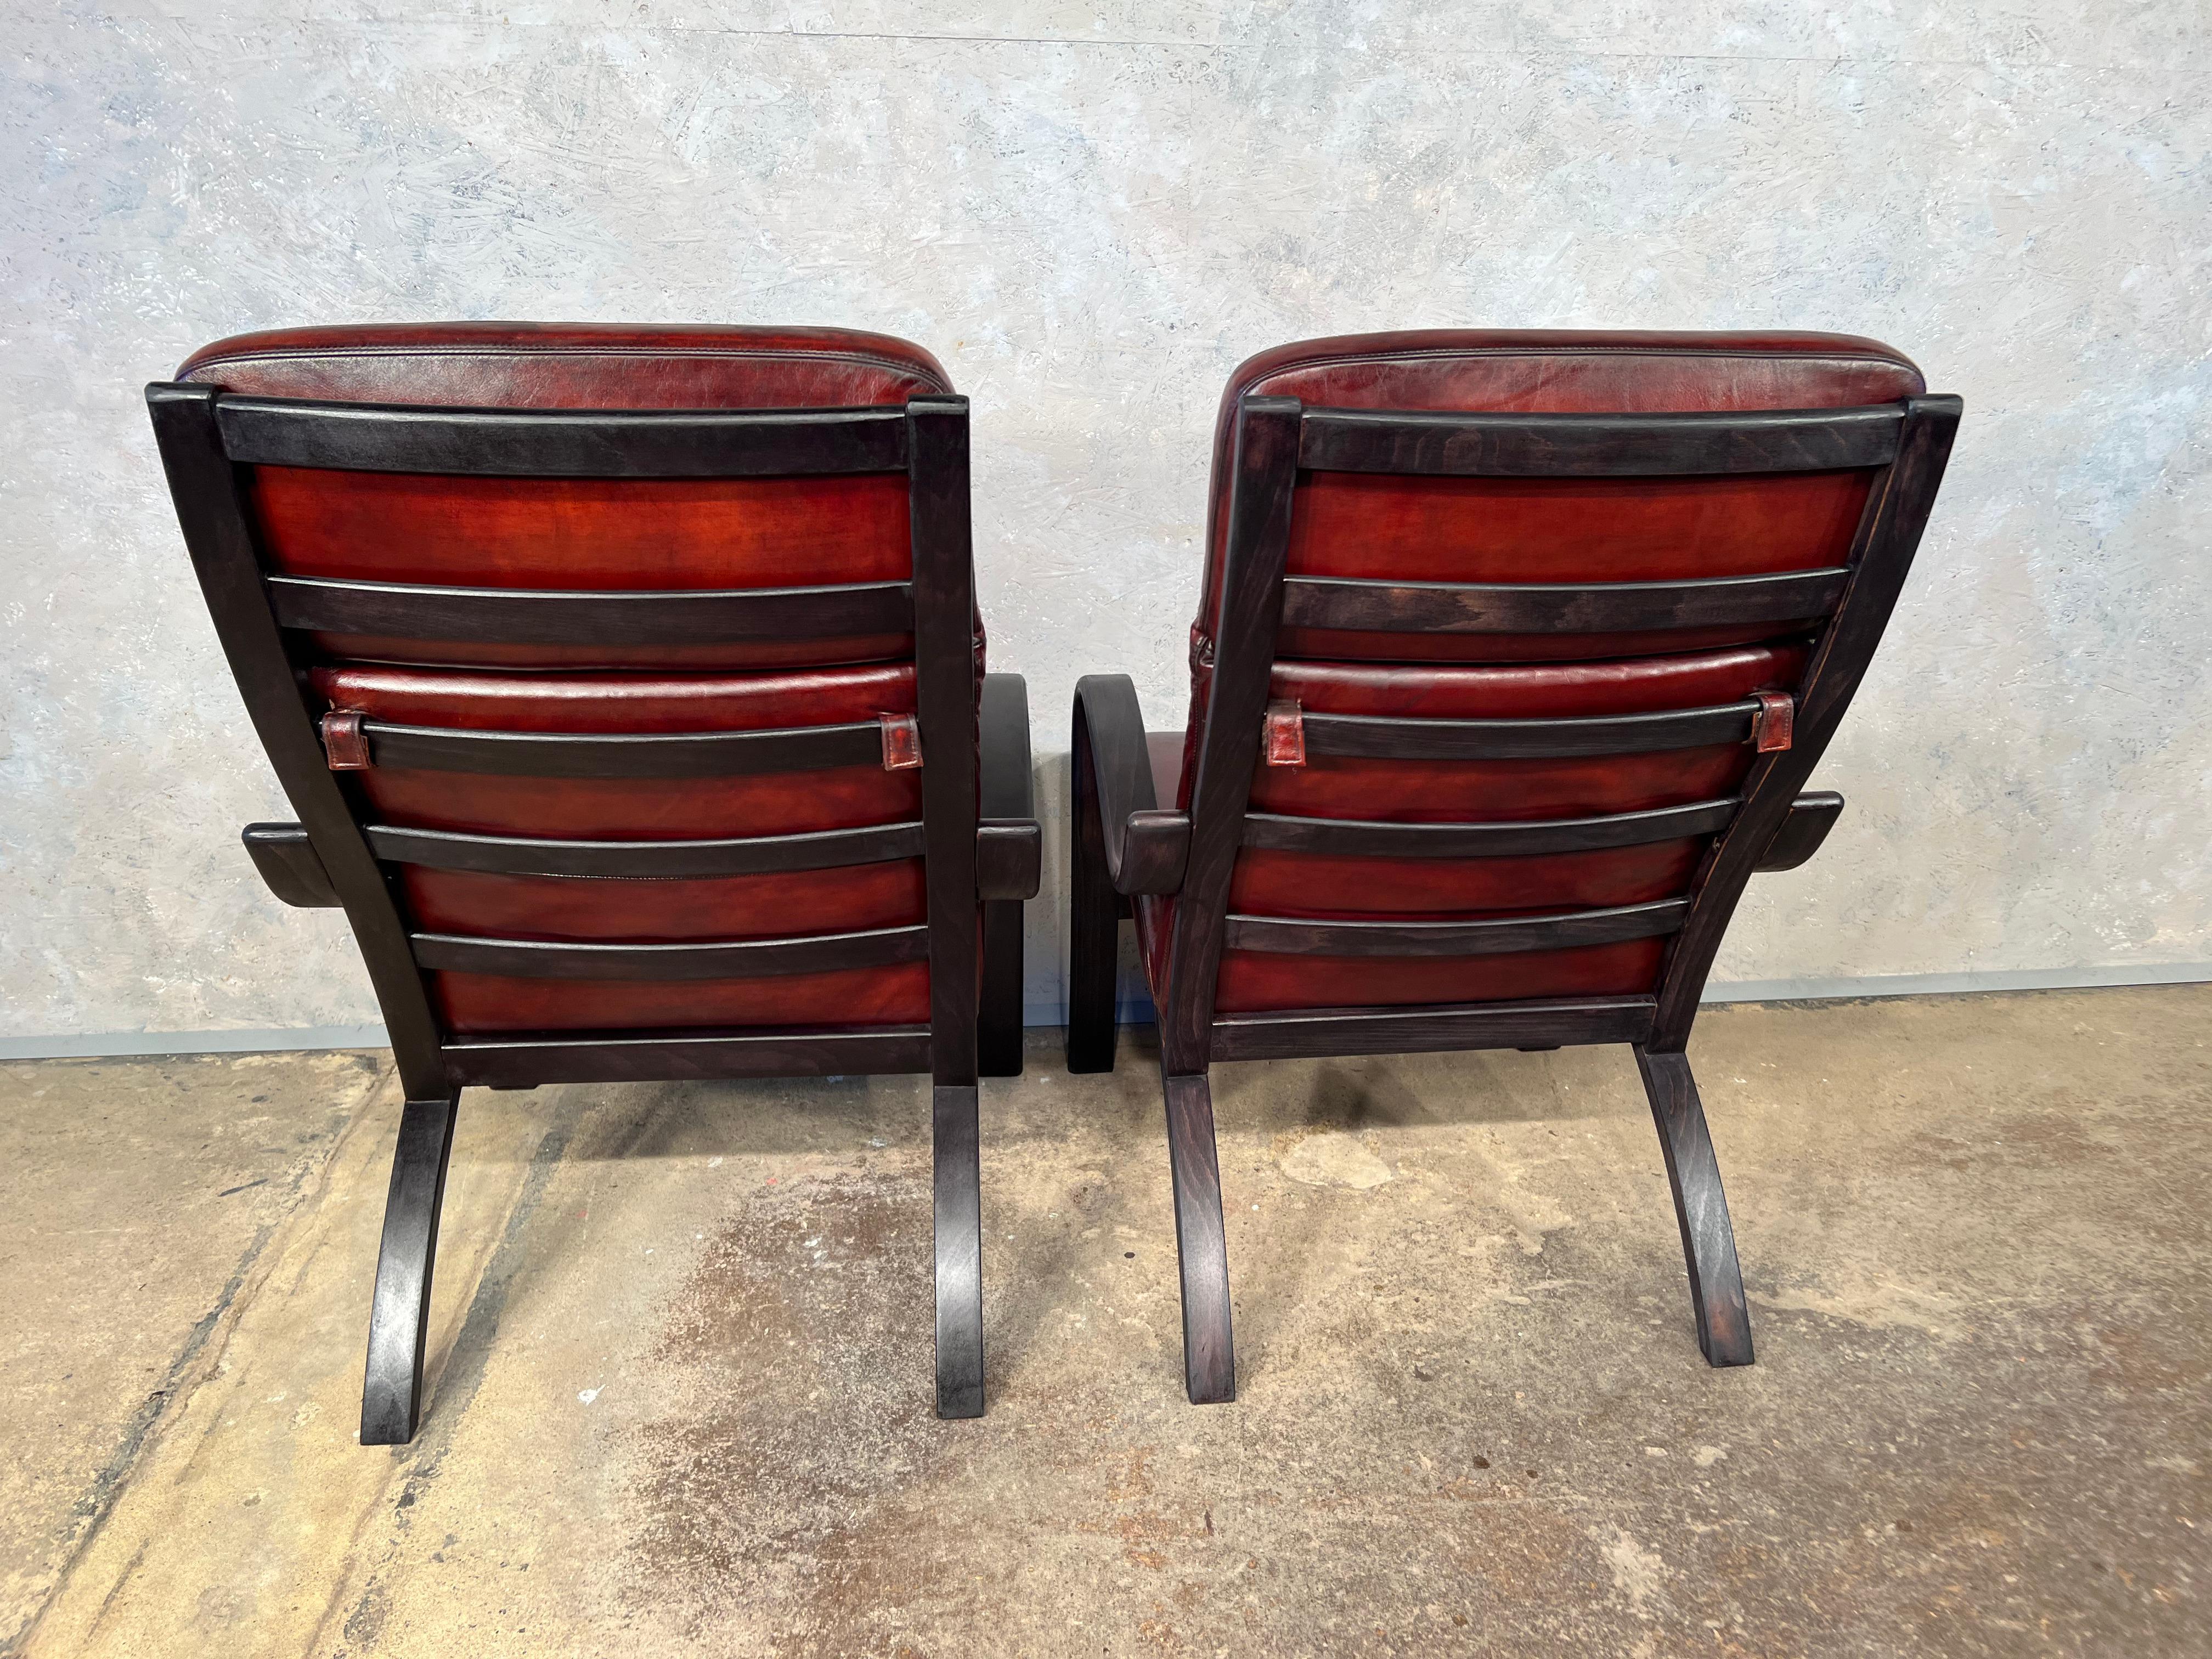 Stunning Pair of Vintage Danish Bentwood Leather Chairs 70s Retro #418 For Sale 2